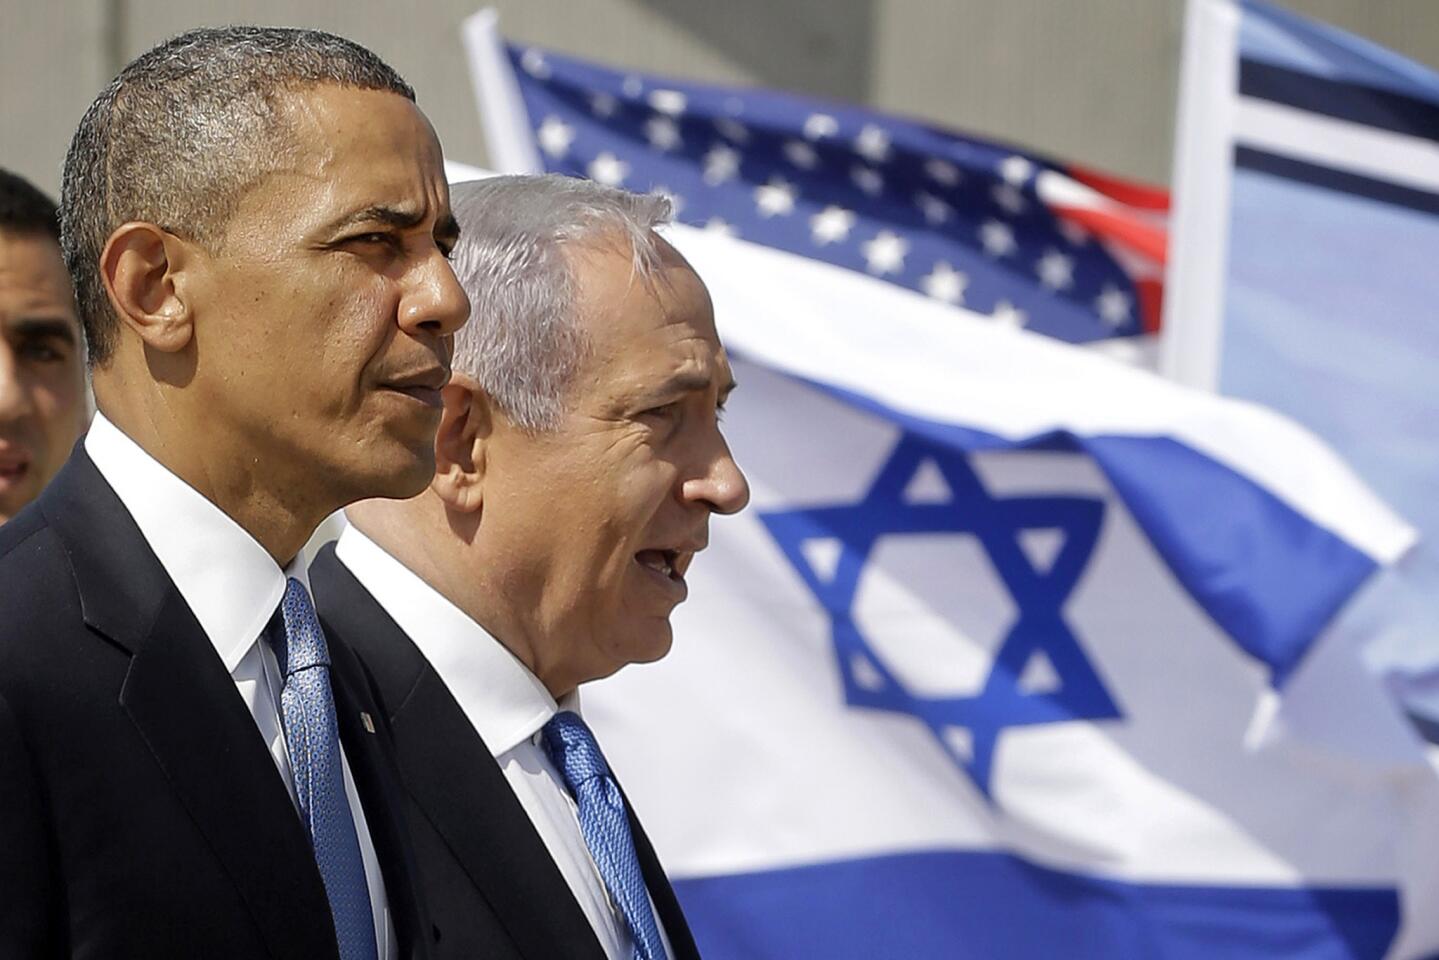 10) Obama goes to Israel ... too late